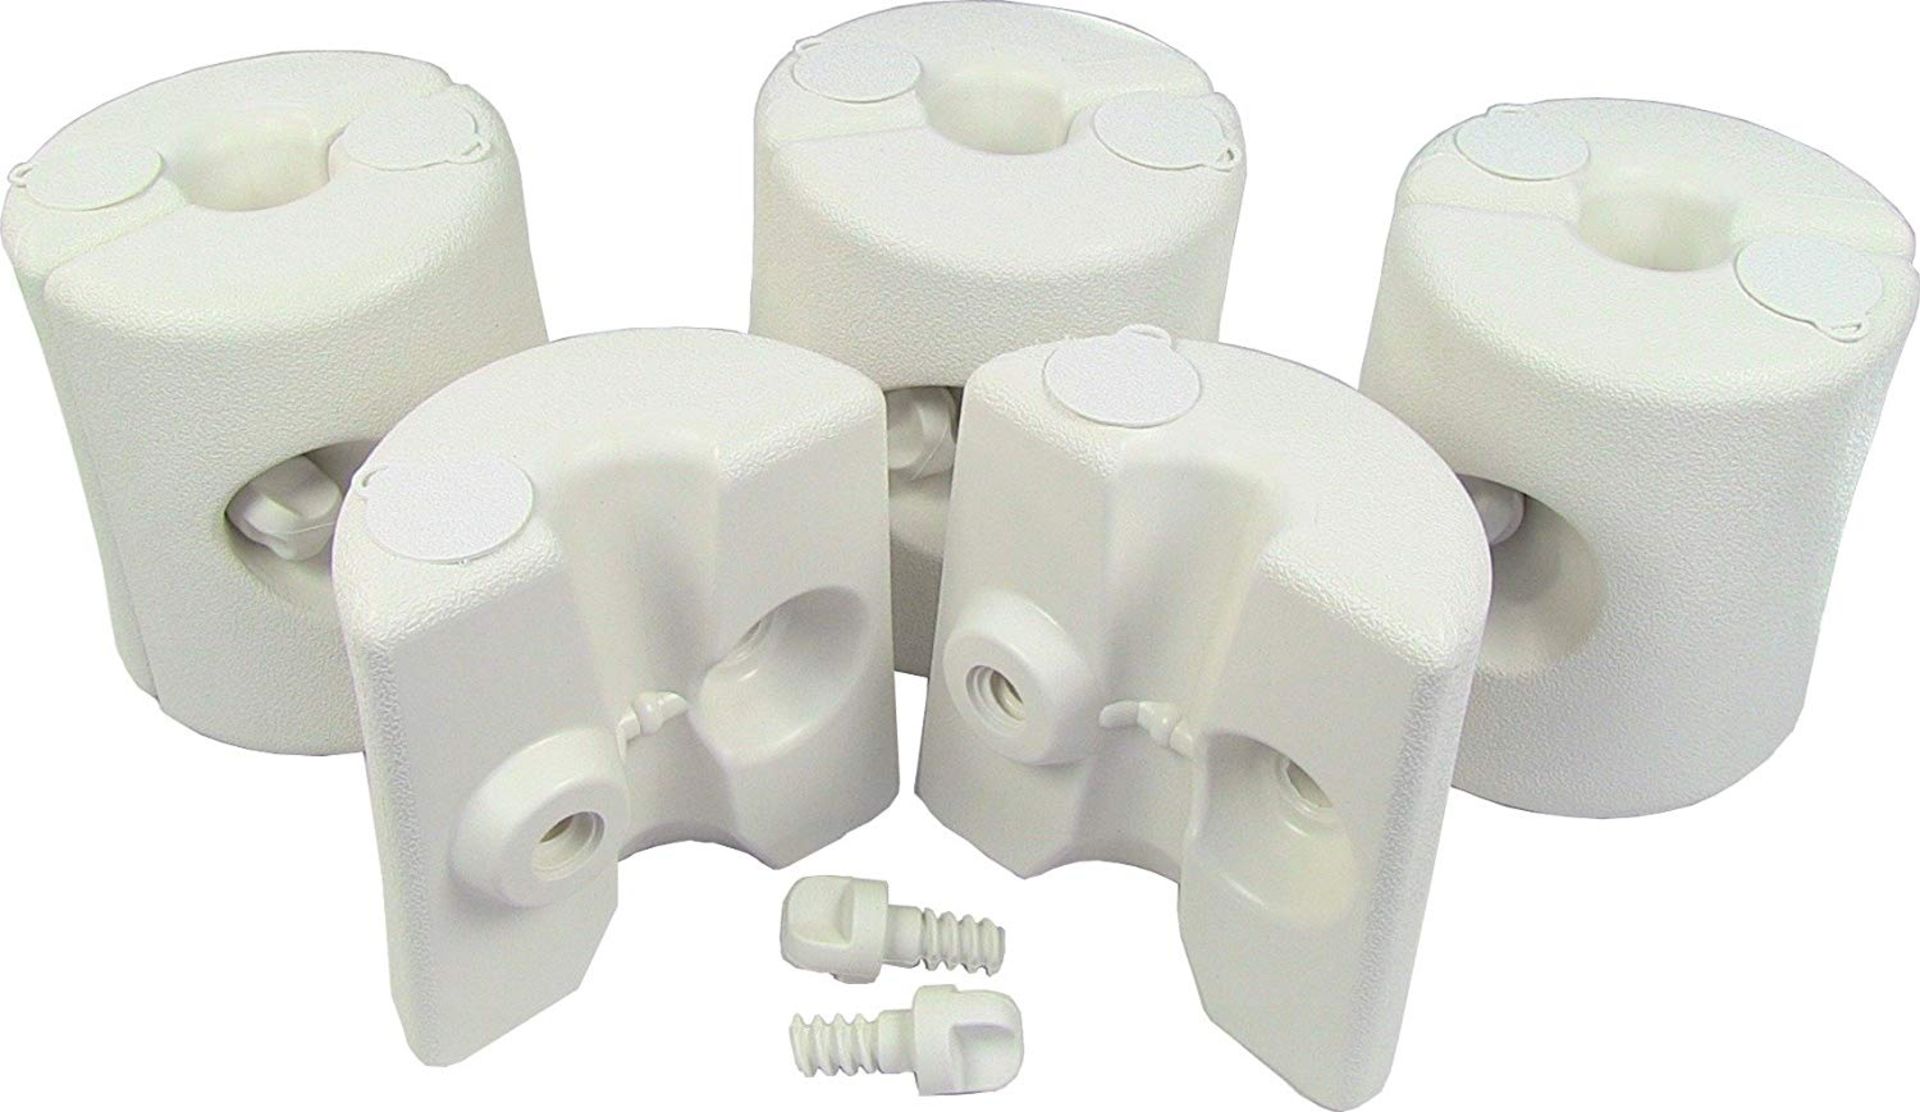 V Brand New DG Set Of Four Gazebo Leg Weights (Fill With Sand Or Water) To Protect Your Gazebo - Image 2 of 2